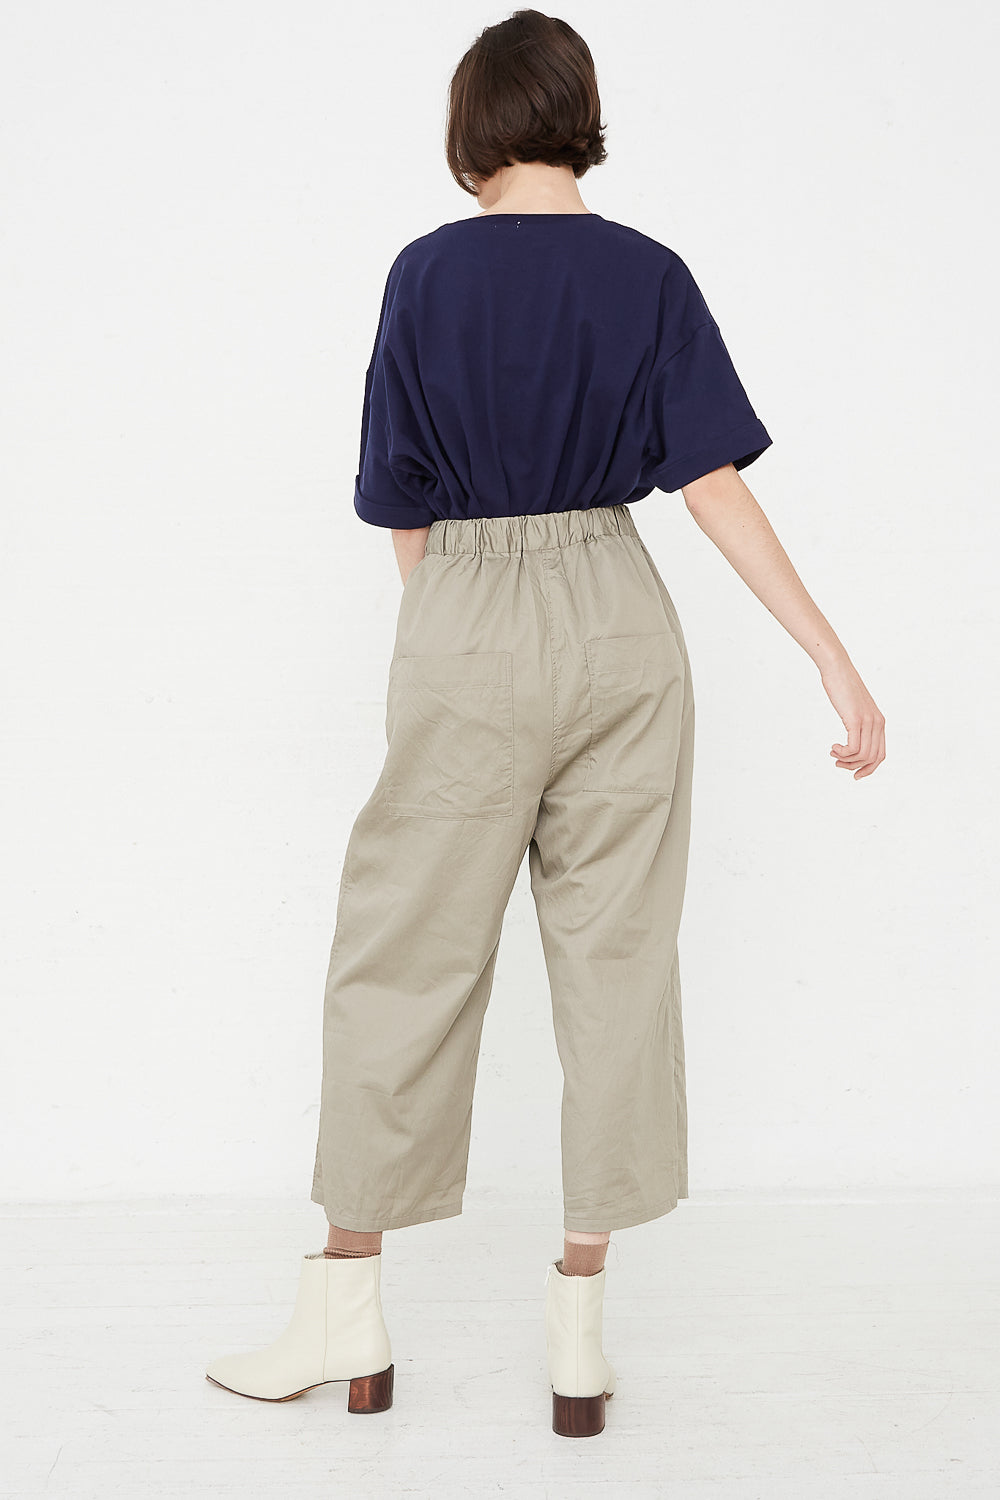 Ichi - Pant in Greige back view